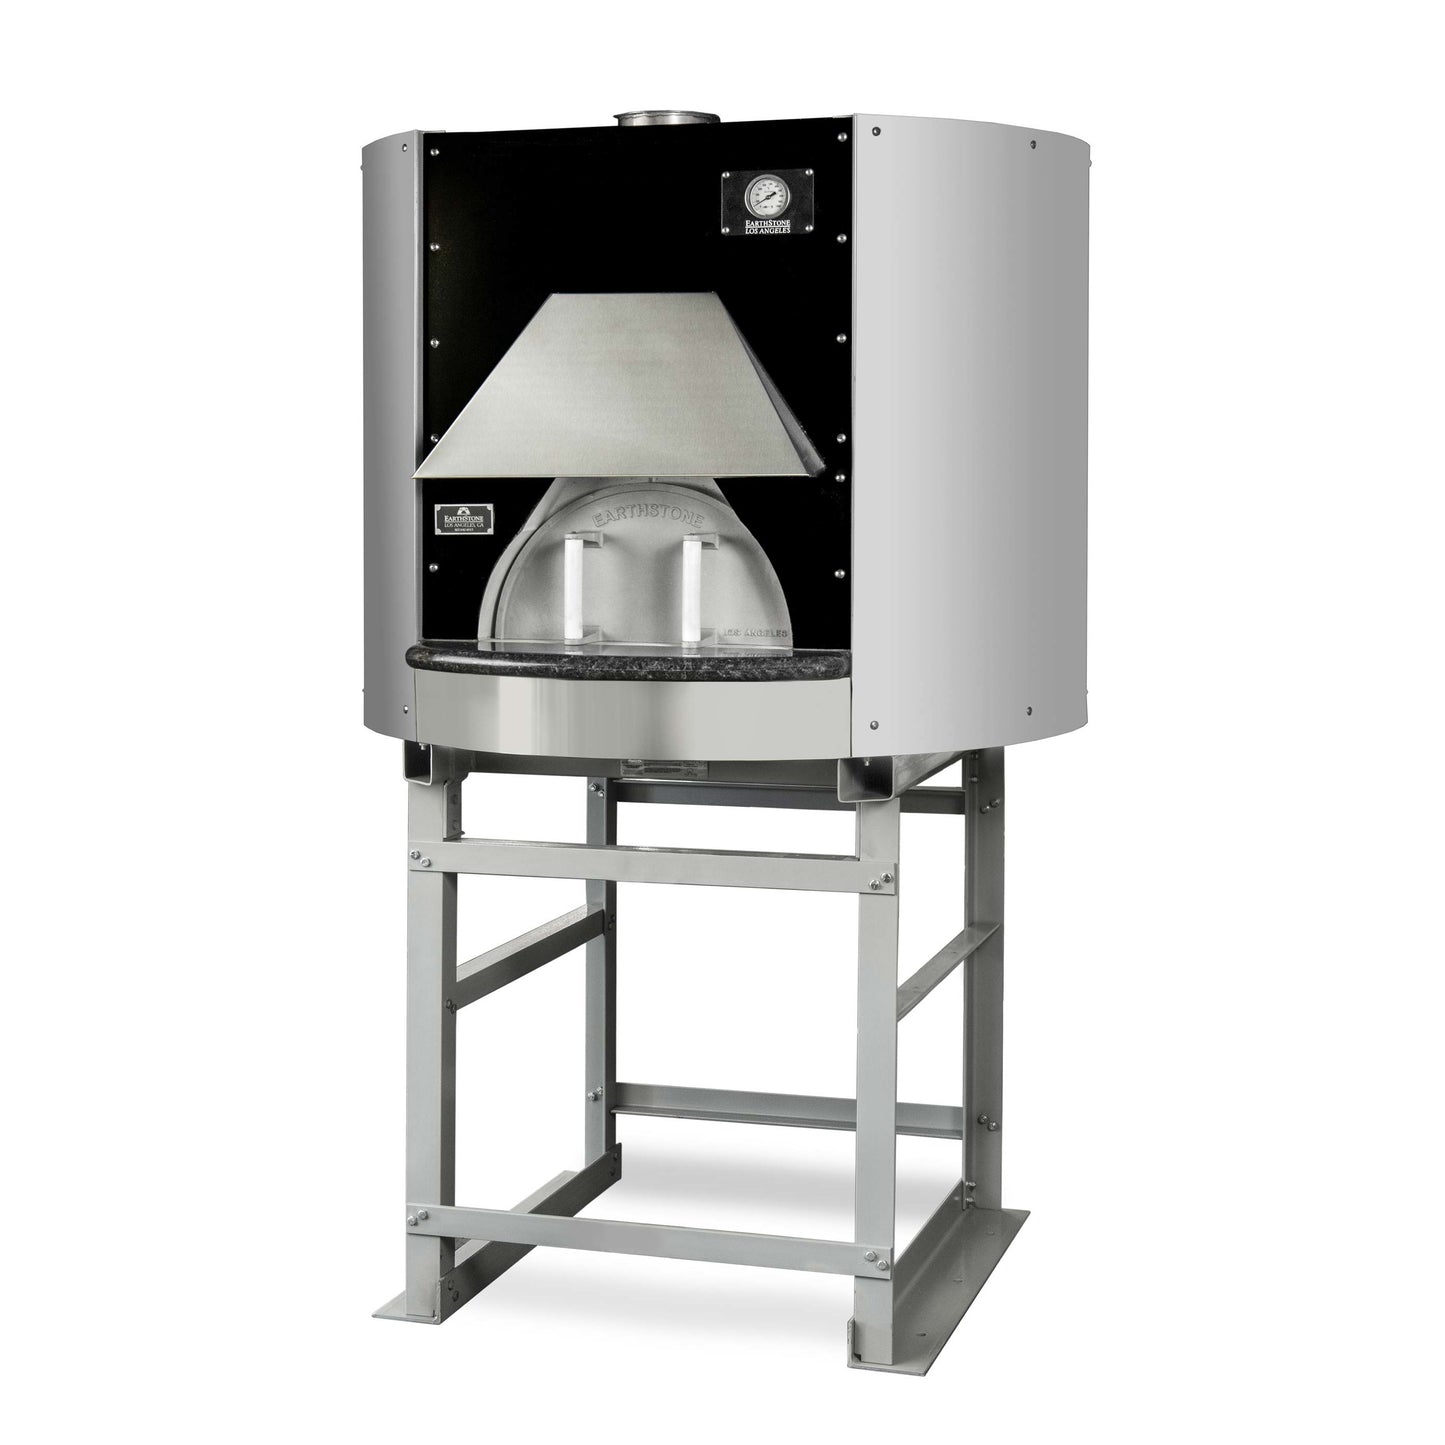 WOOD FIRED PRE-ASSEMBLED OVEN - Model 90-PA